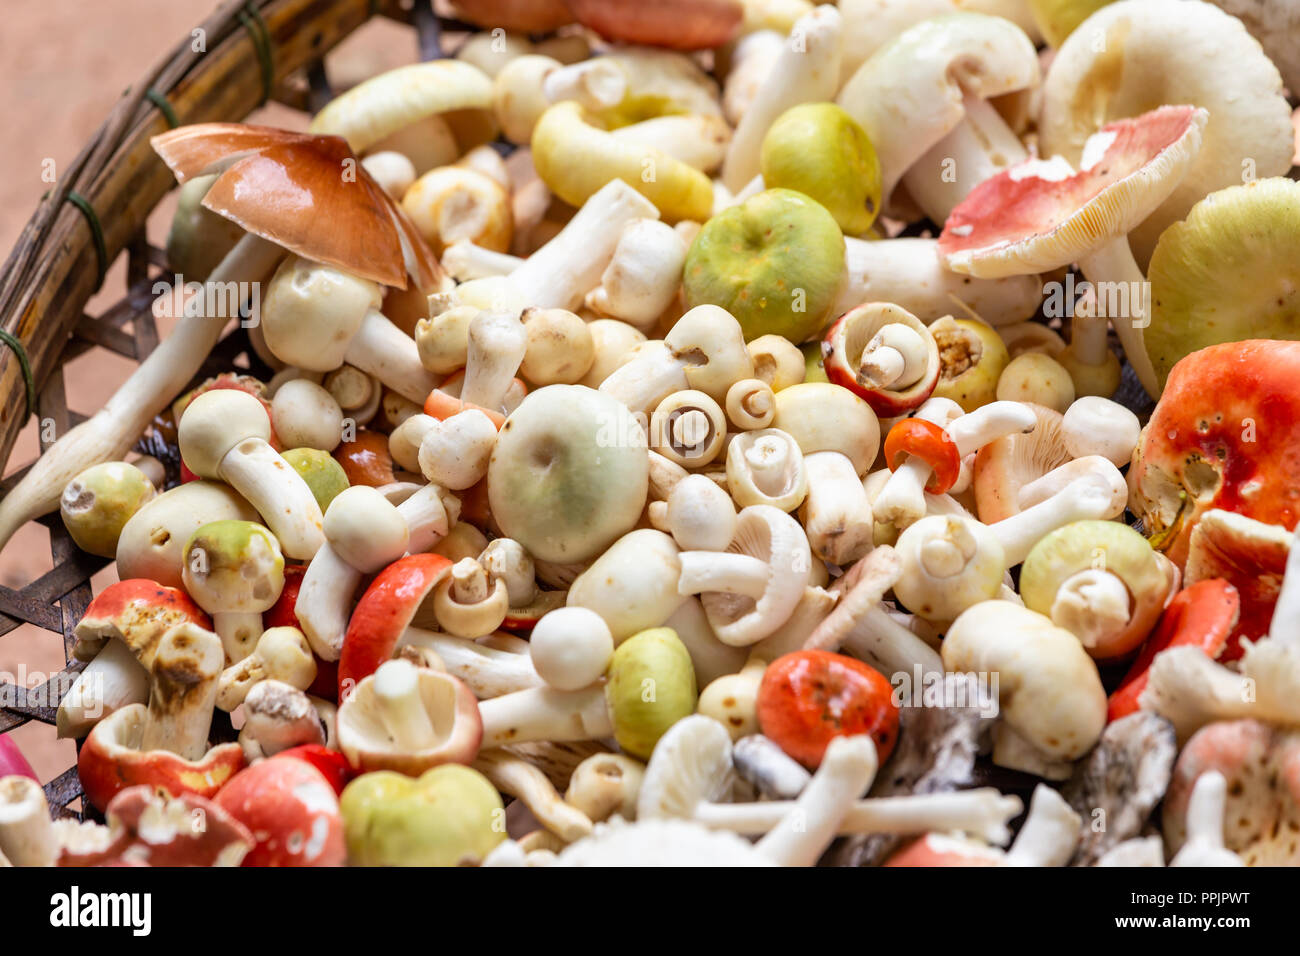 Group of mushrooms from nature. Stock Photo